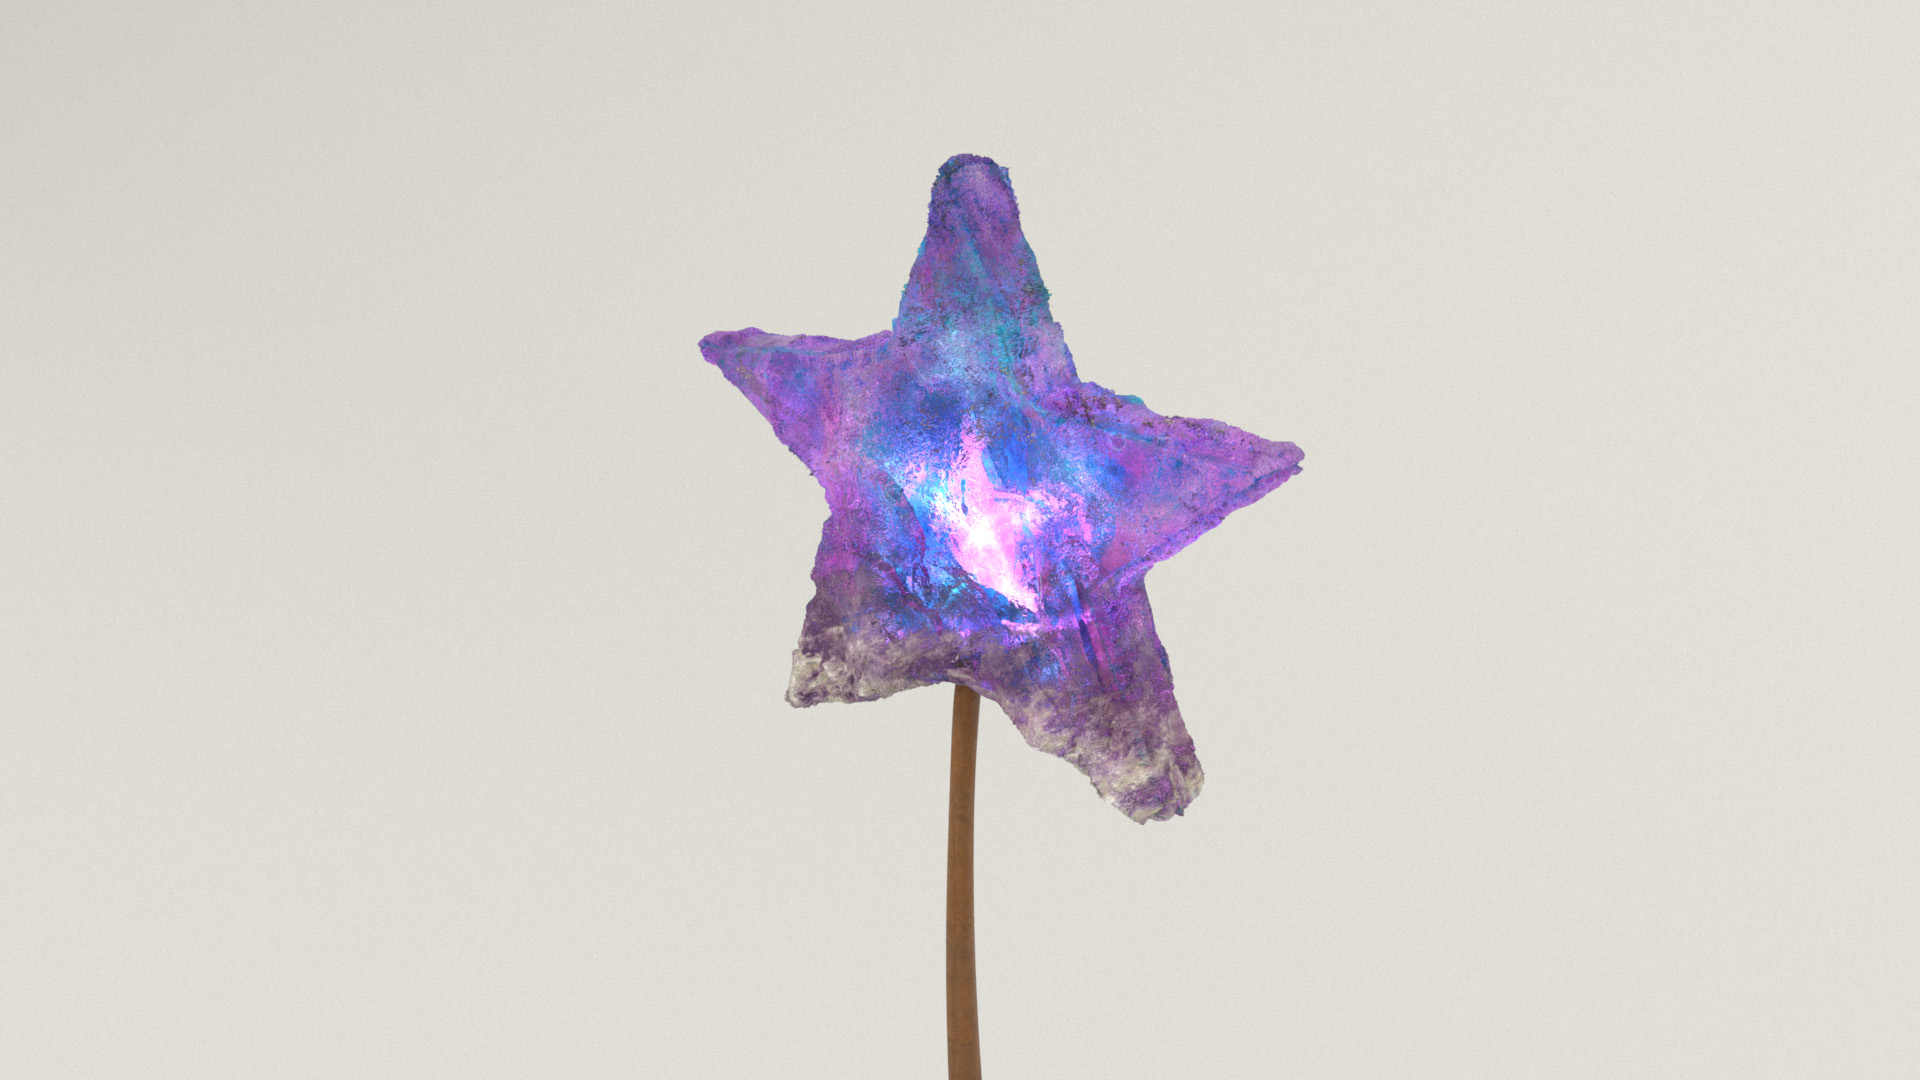 Figure 26: Magic wand star made from the same material as the crystal.